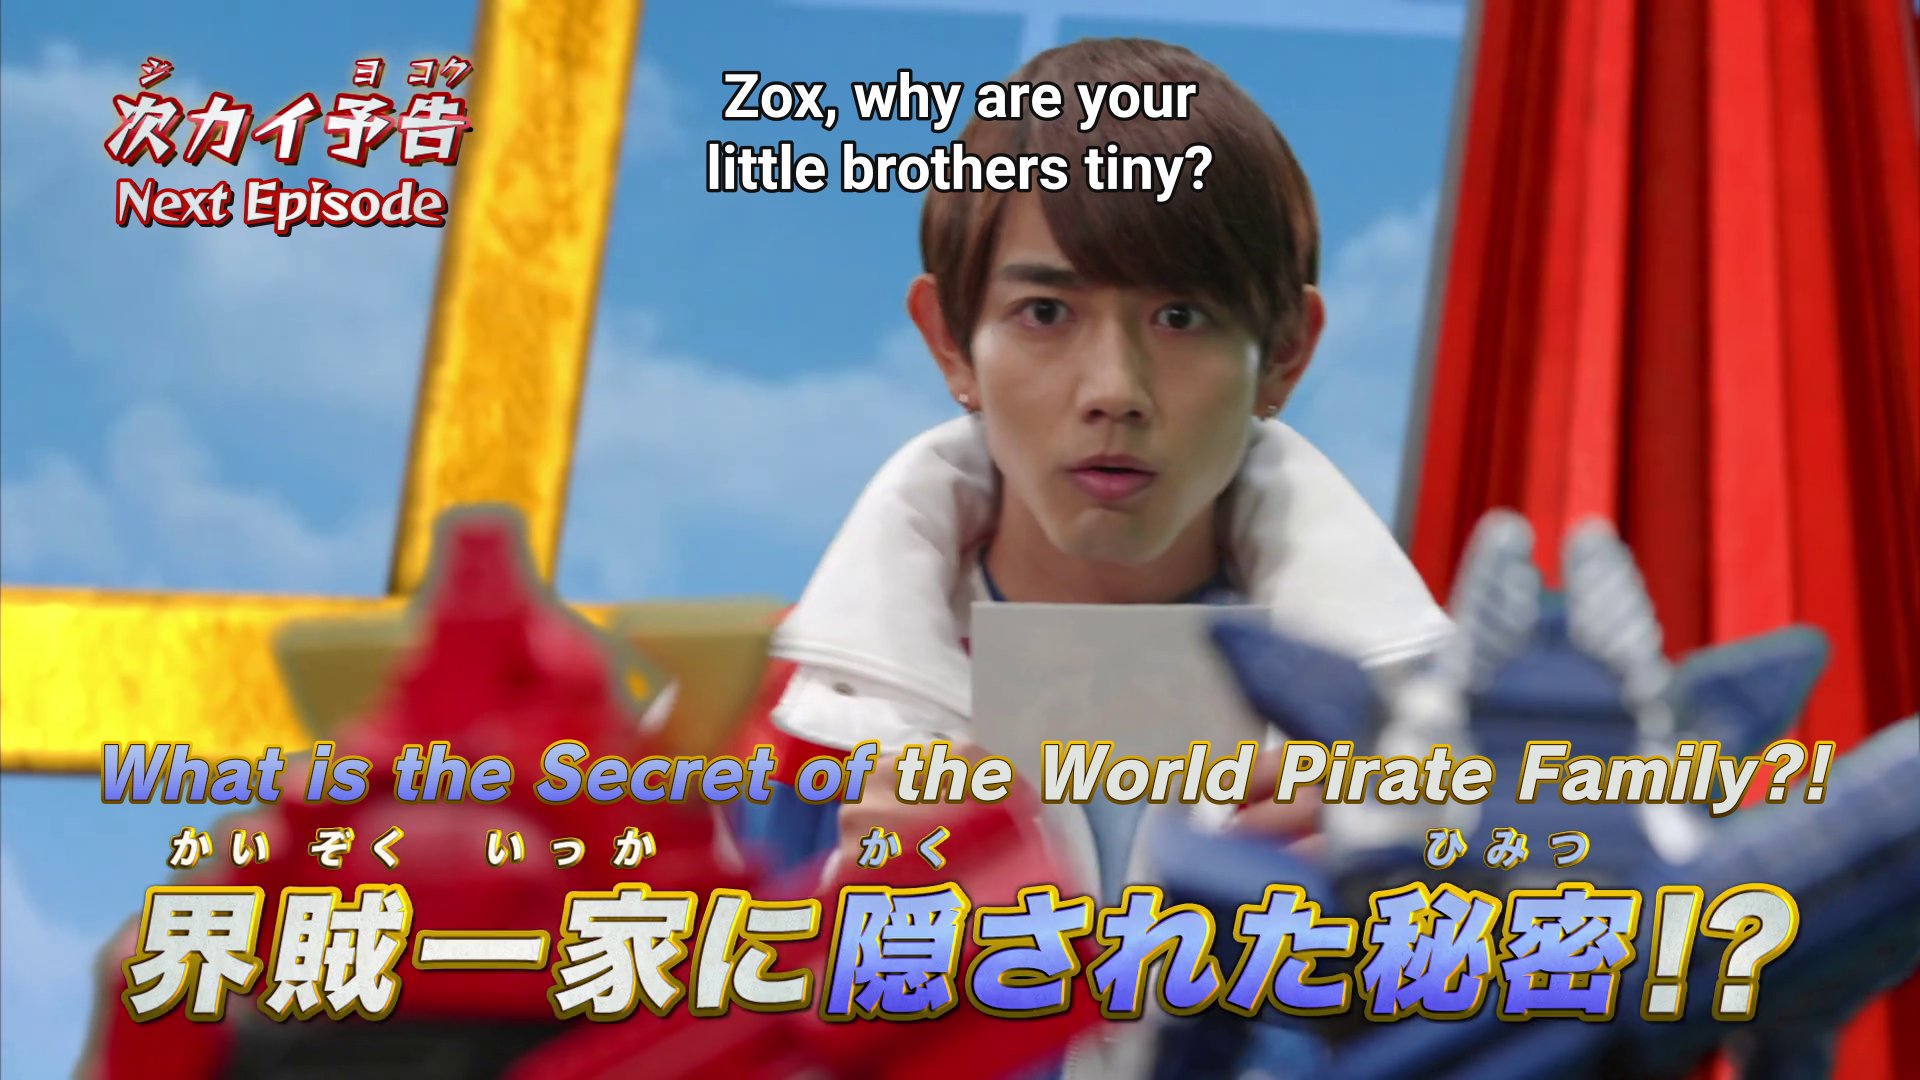 Kaito looking at a red and a blue tiny robot: Zox, why are your little brothers tiny?